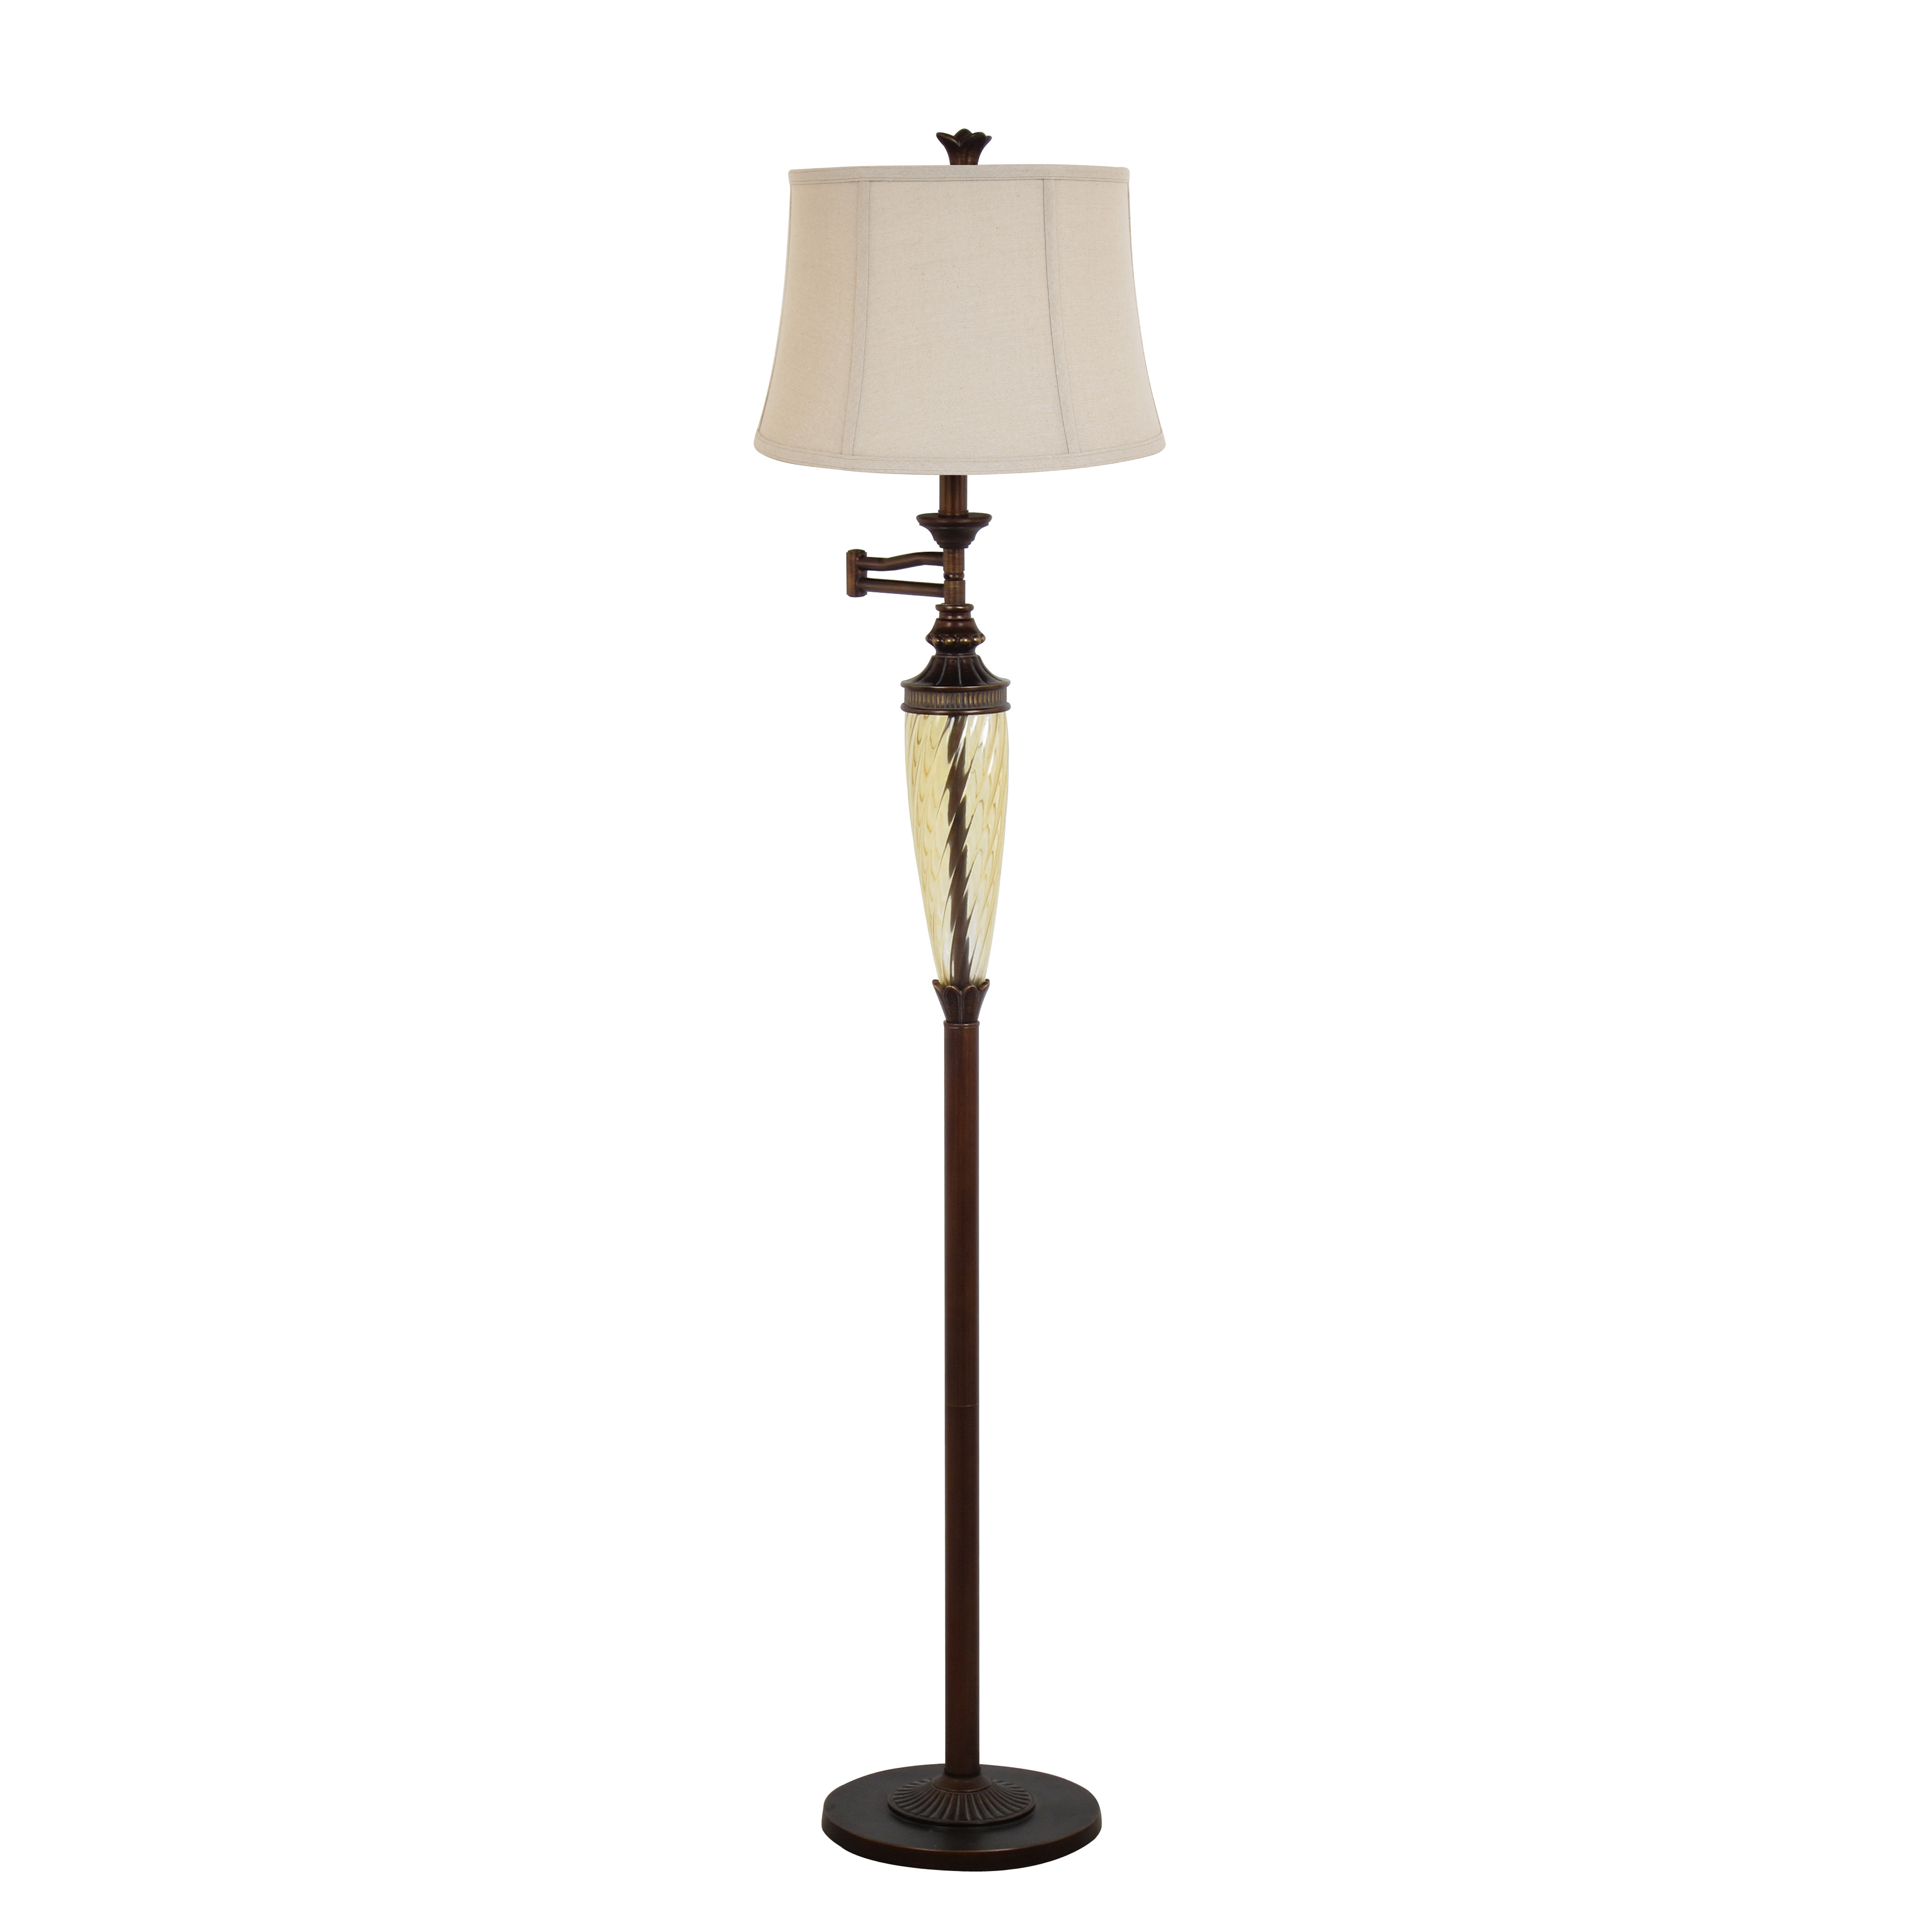 Legacy Home Furnishing and Decor 60" Swirl Glass Column With Swing Arm Floor Lamp And Beige Linen Bell Shade